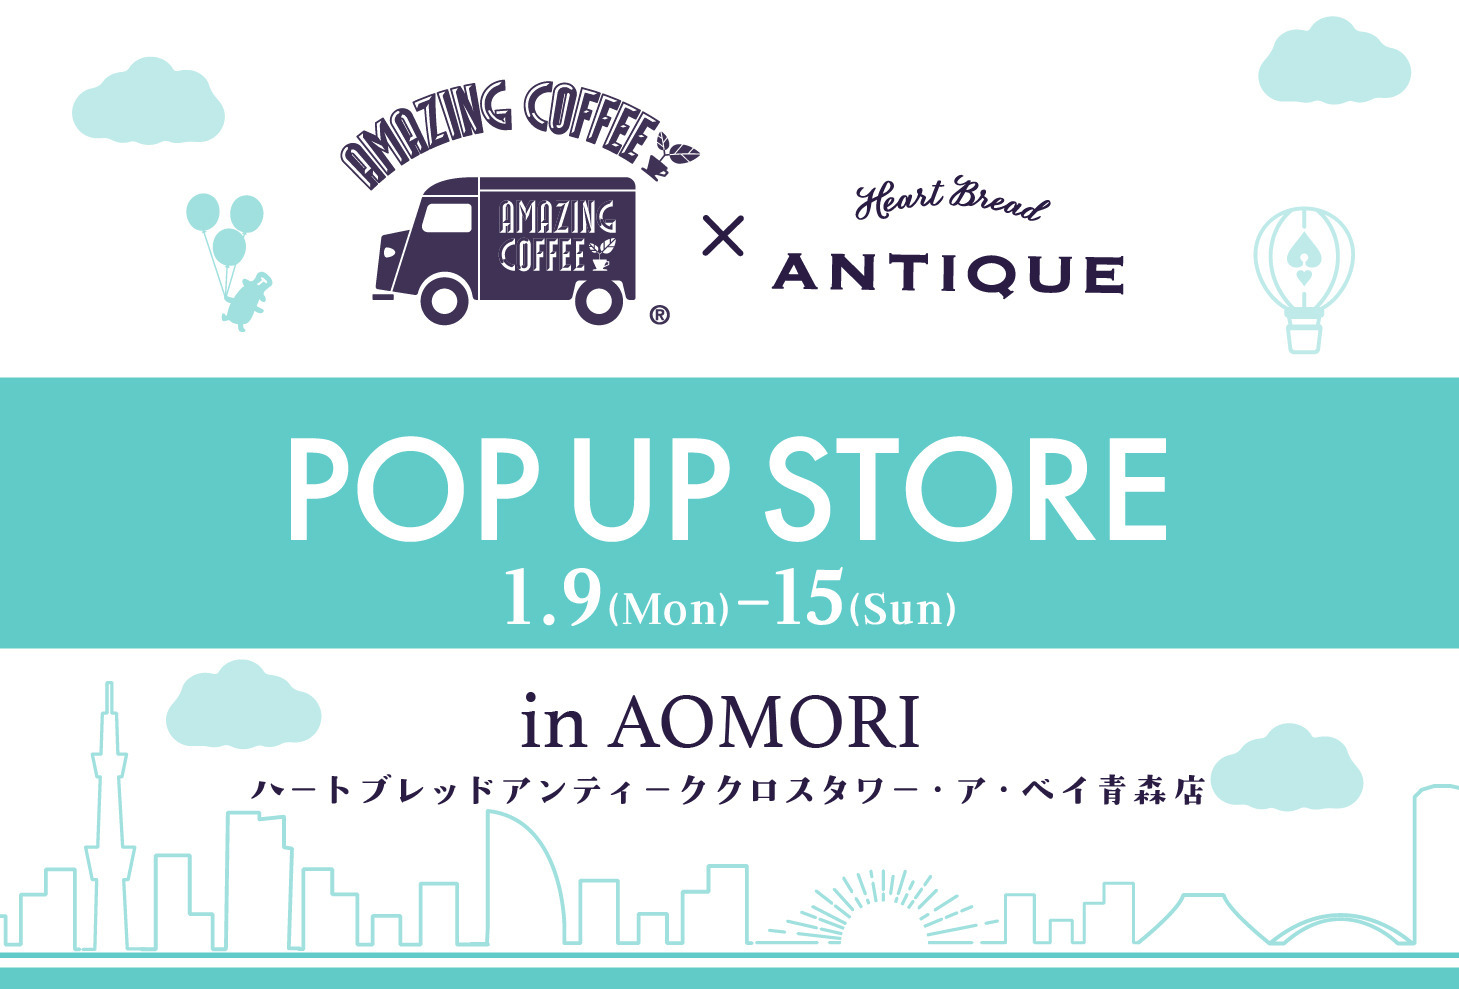 【Heart Bread ANTIQUE × cafe bar BLUCE × AMAZING COFFEE】POP UP STORE in青森 1月9日(月・祝)よりクロスタワー ア・ベイ青森店にて開催！